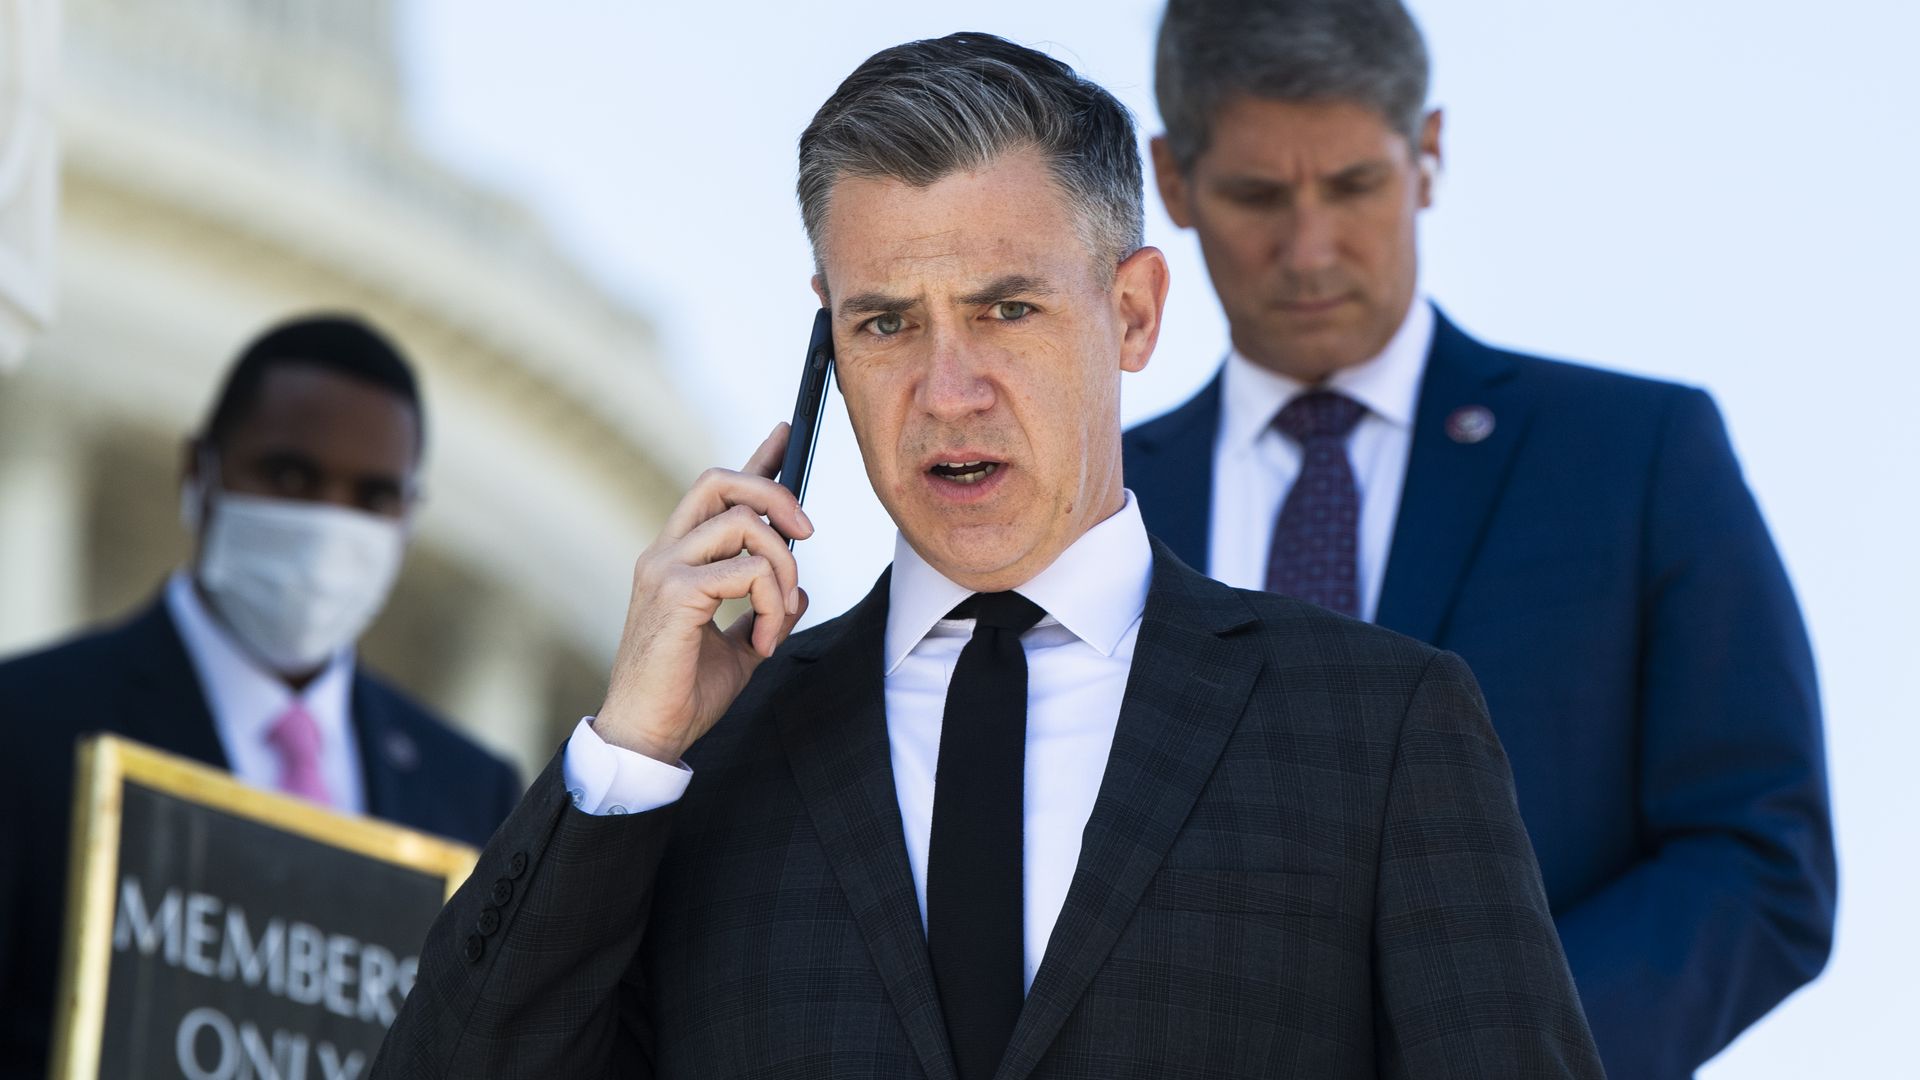 Rep. Jim Banks is seen speaking on a cellphone.